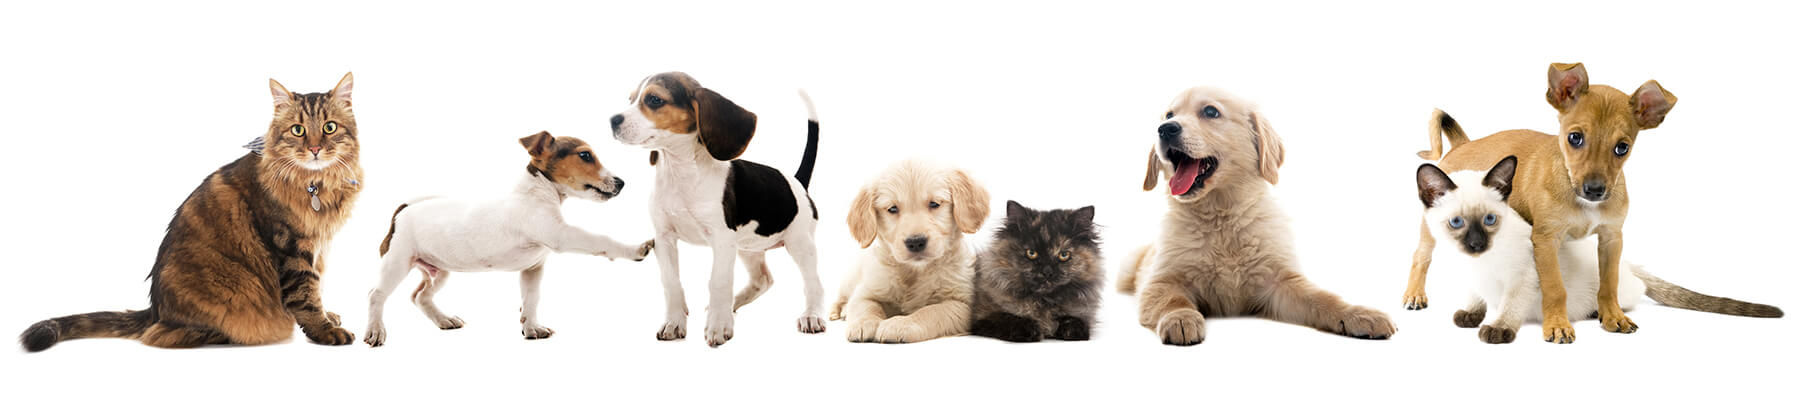 Dogs Cats White Background